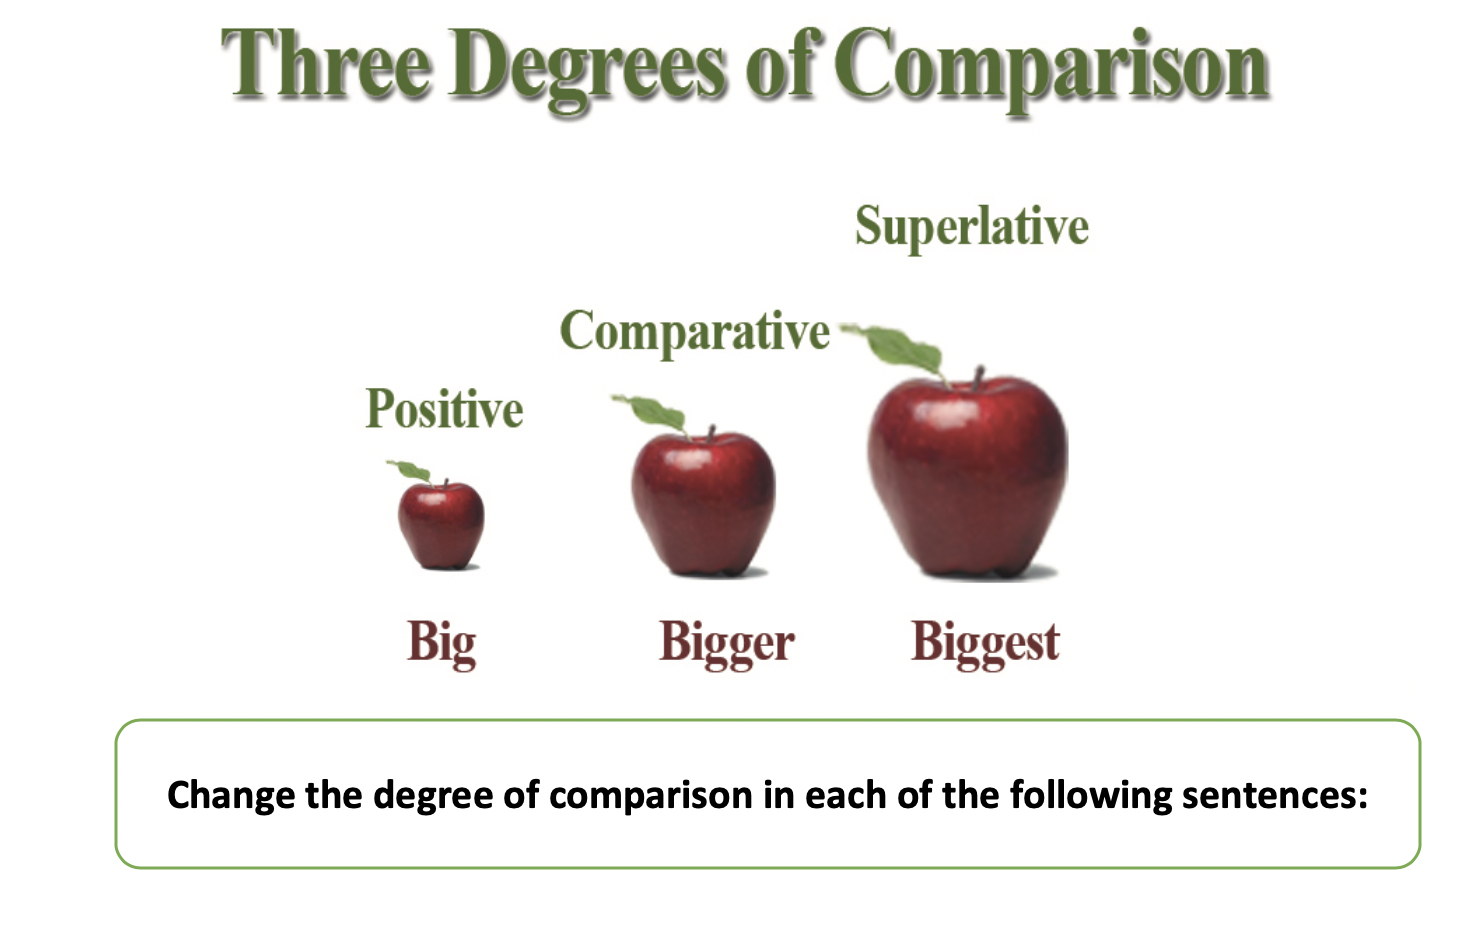 Way of comparing. Comparison of adjectives. Degrees of Comparison of adjectives. Degrees of Comparison в английском. Degrees of Comparison of adjectives таблица.